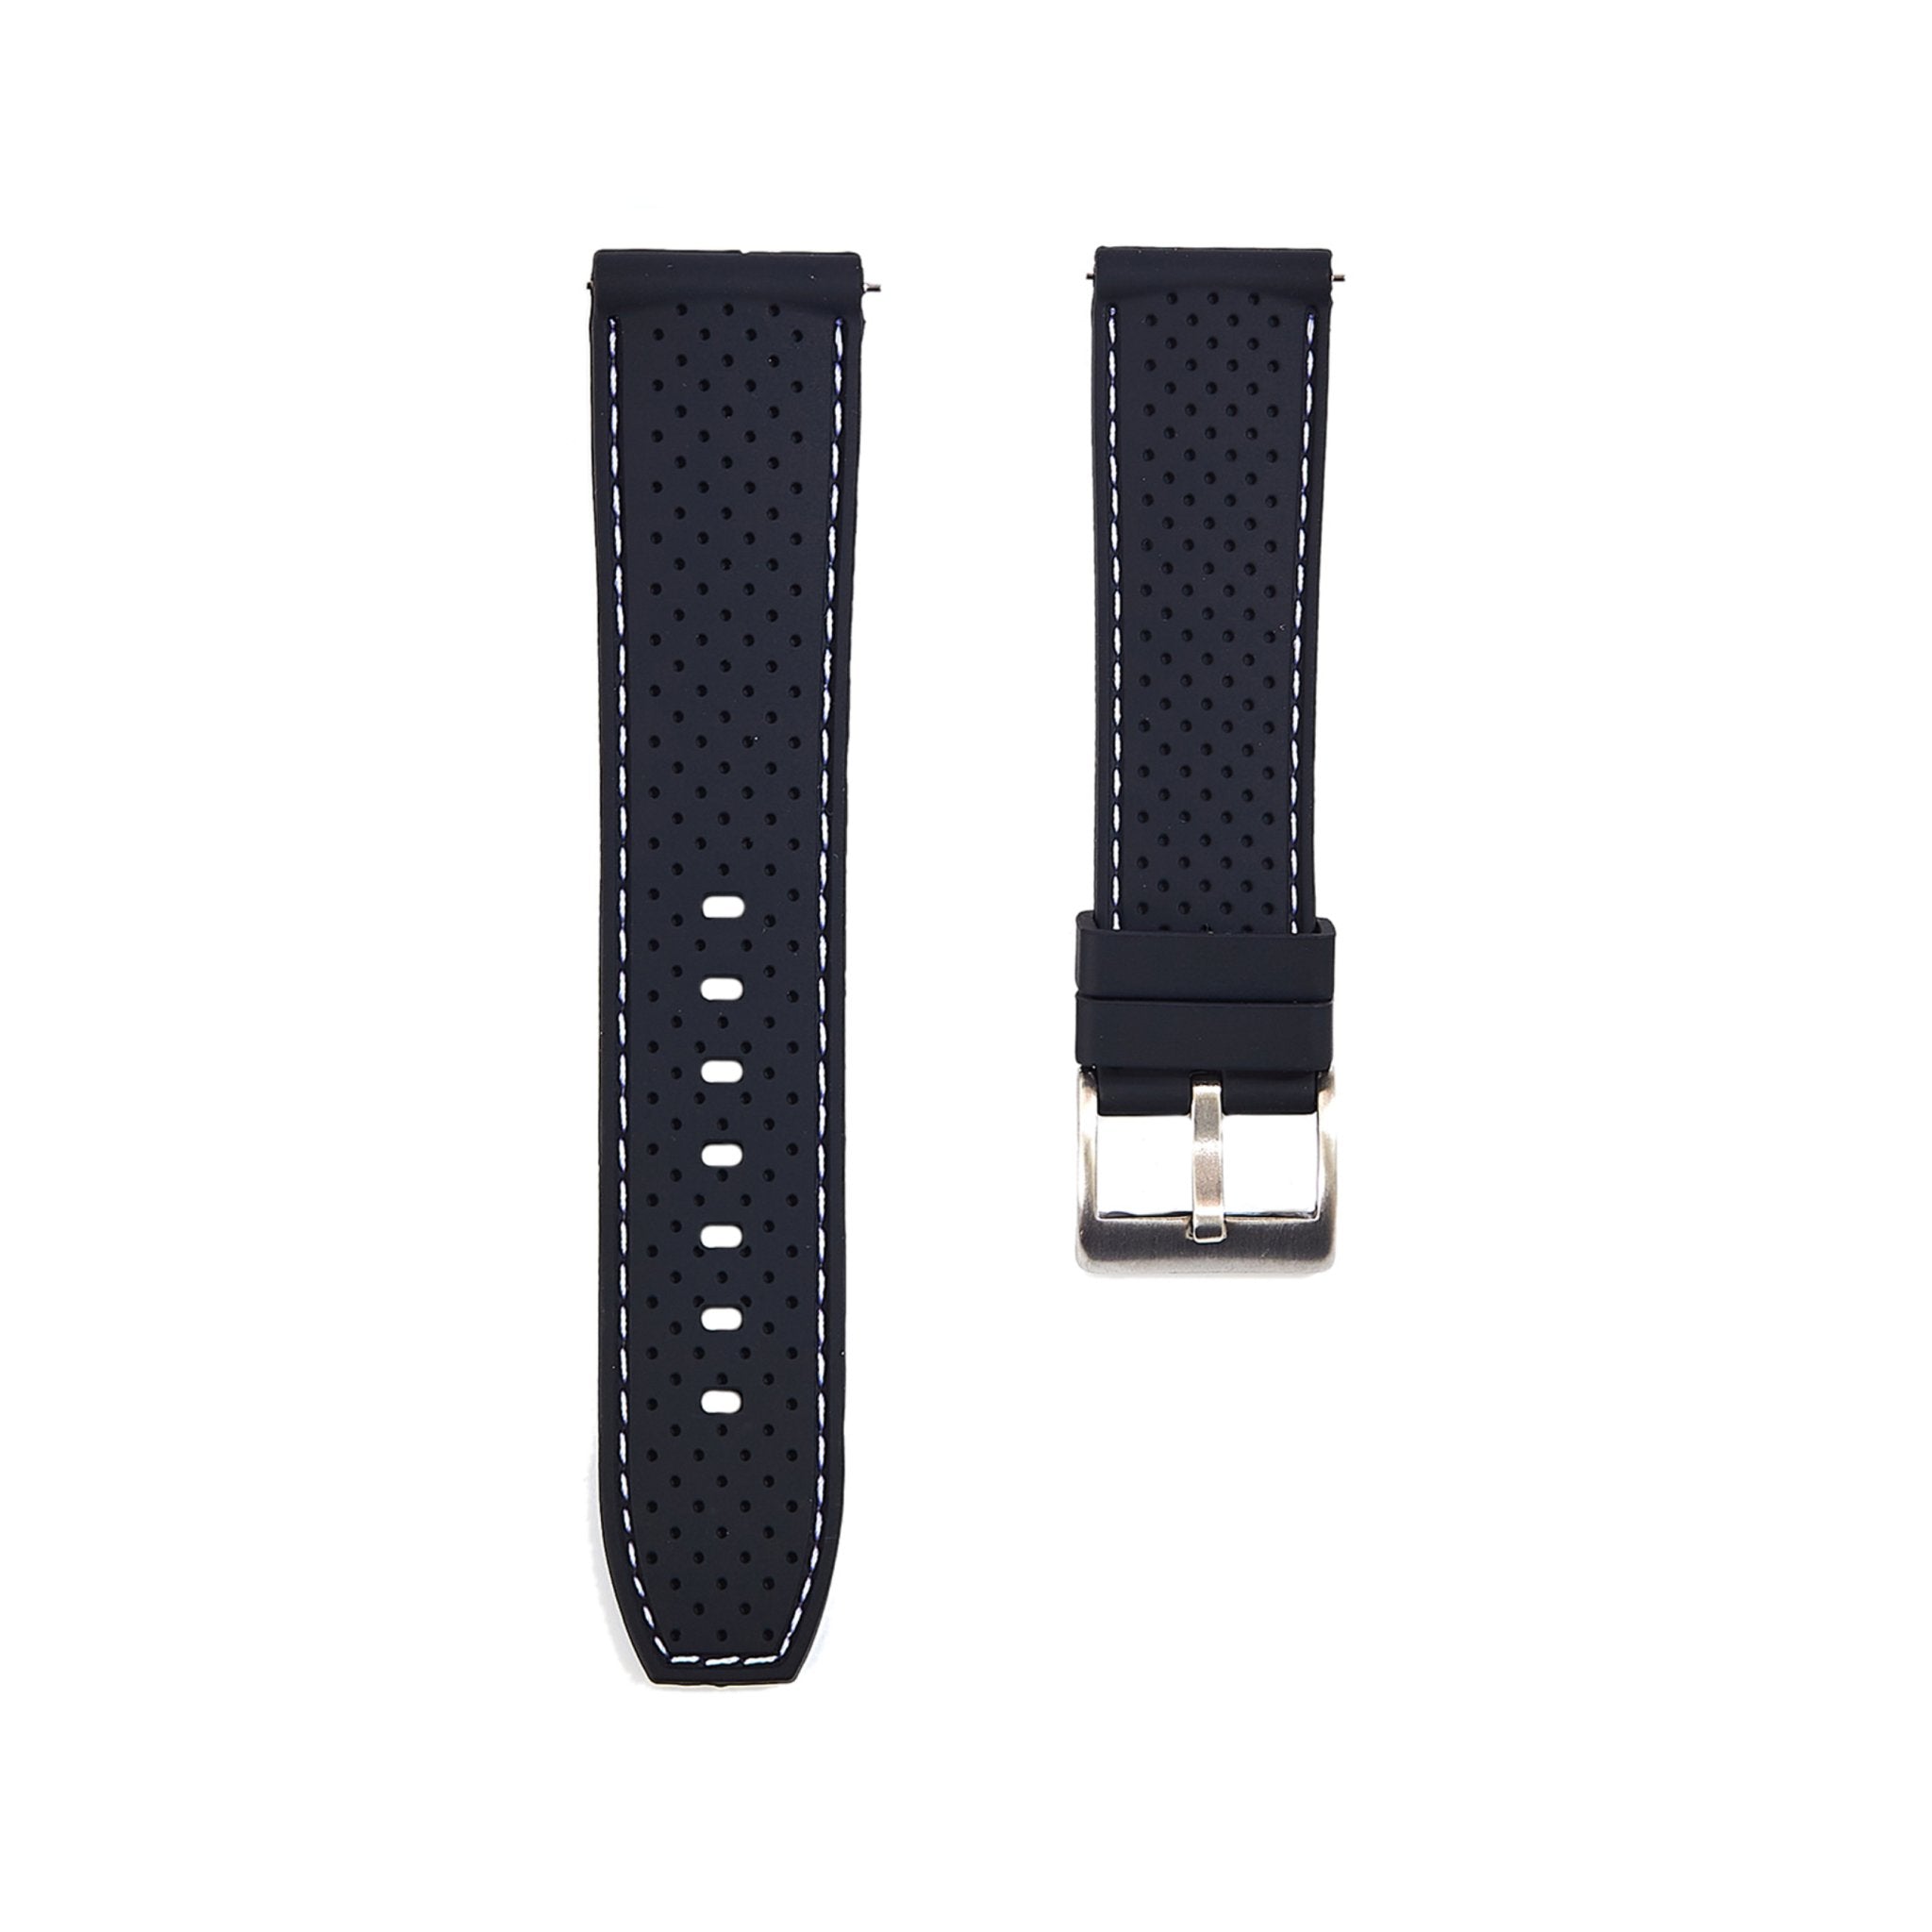 Perforated Stitch Soft Silicone Strap - Quick-Release - Black with White Stitch (2401) -StrapSeeker